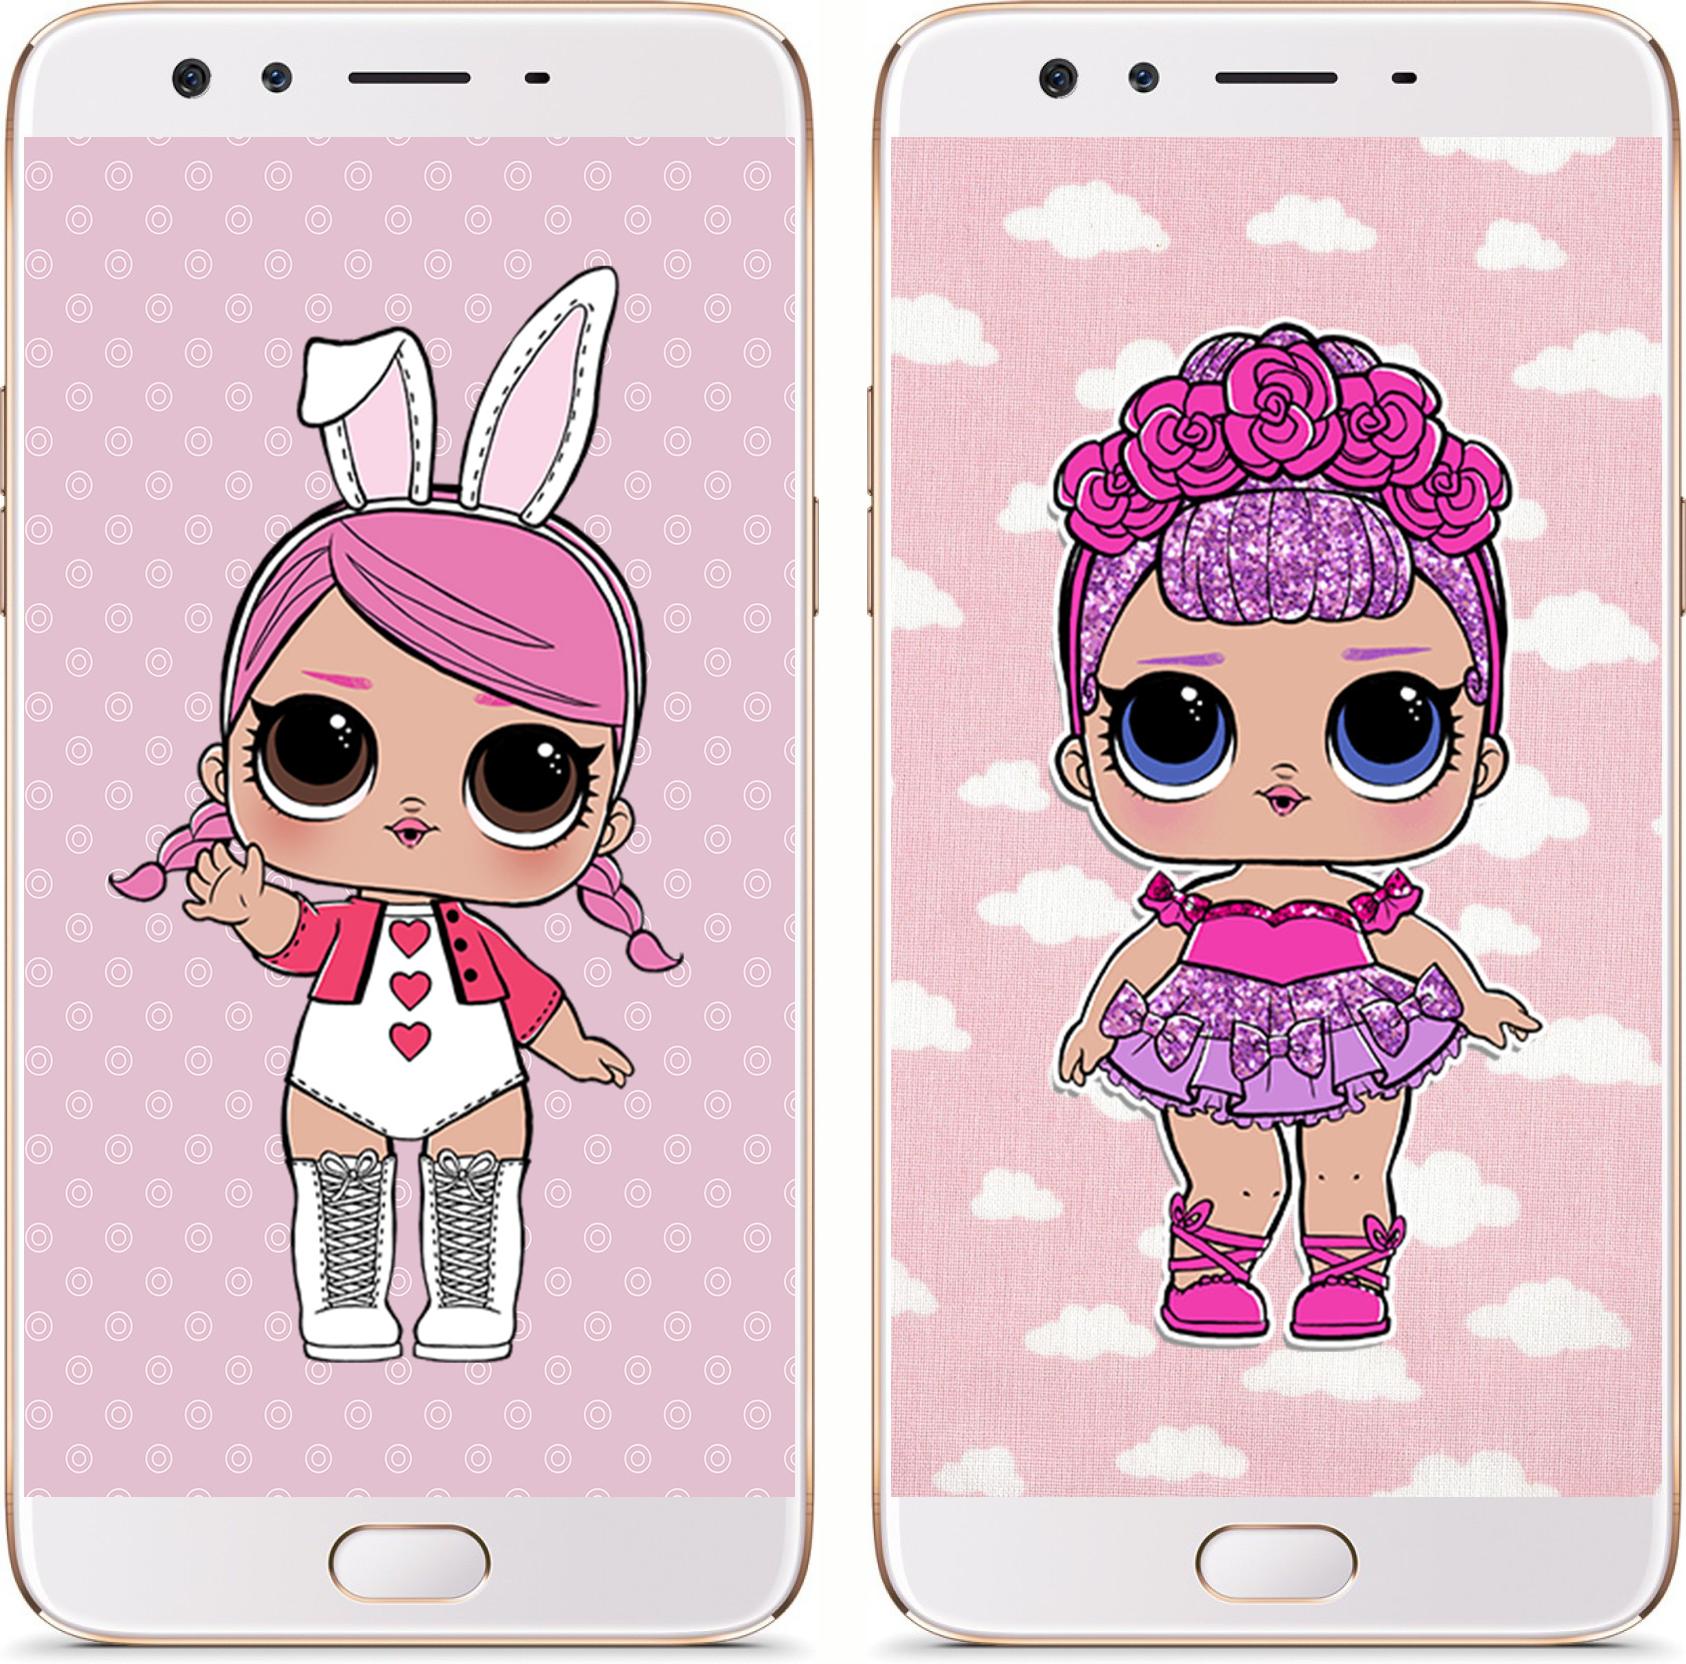 LOL Dolls Wallpapers for Android - APK Download